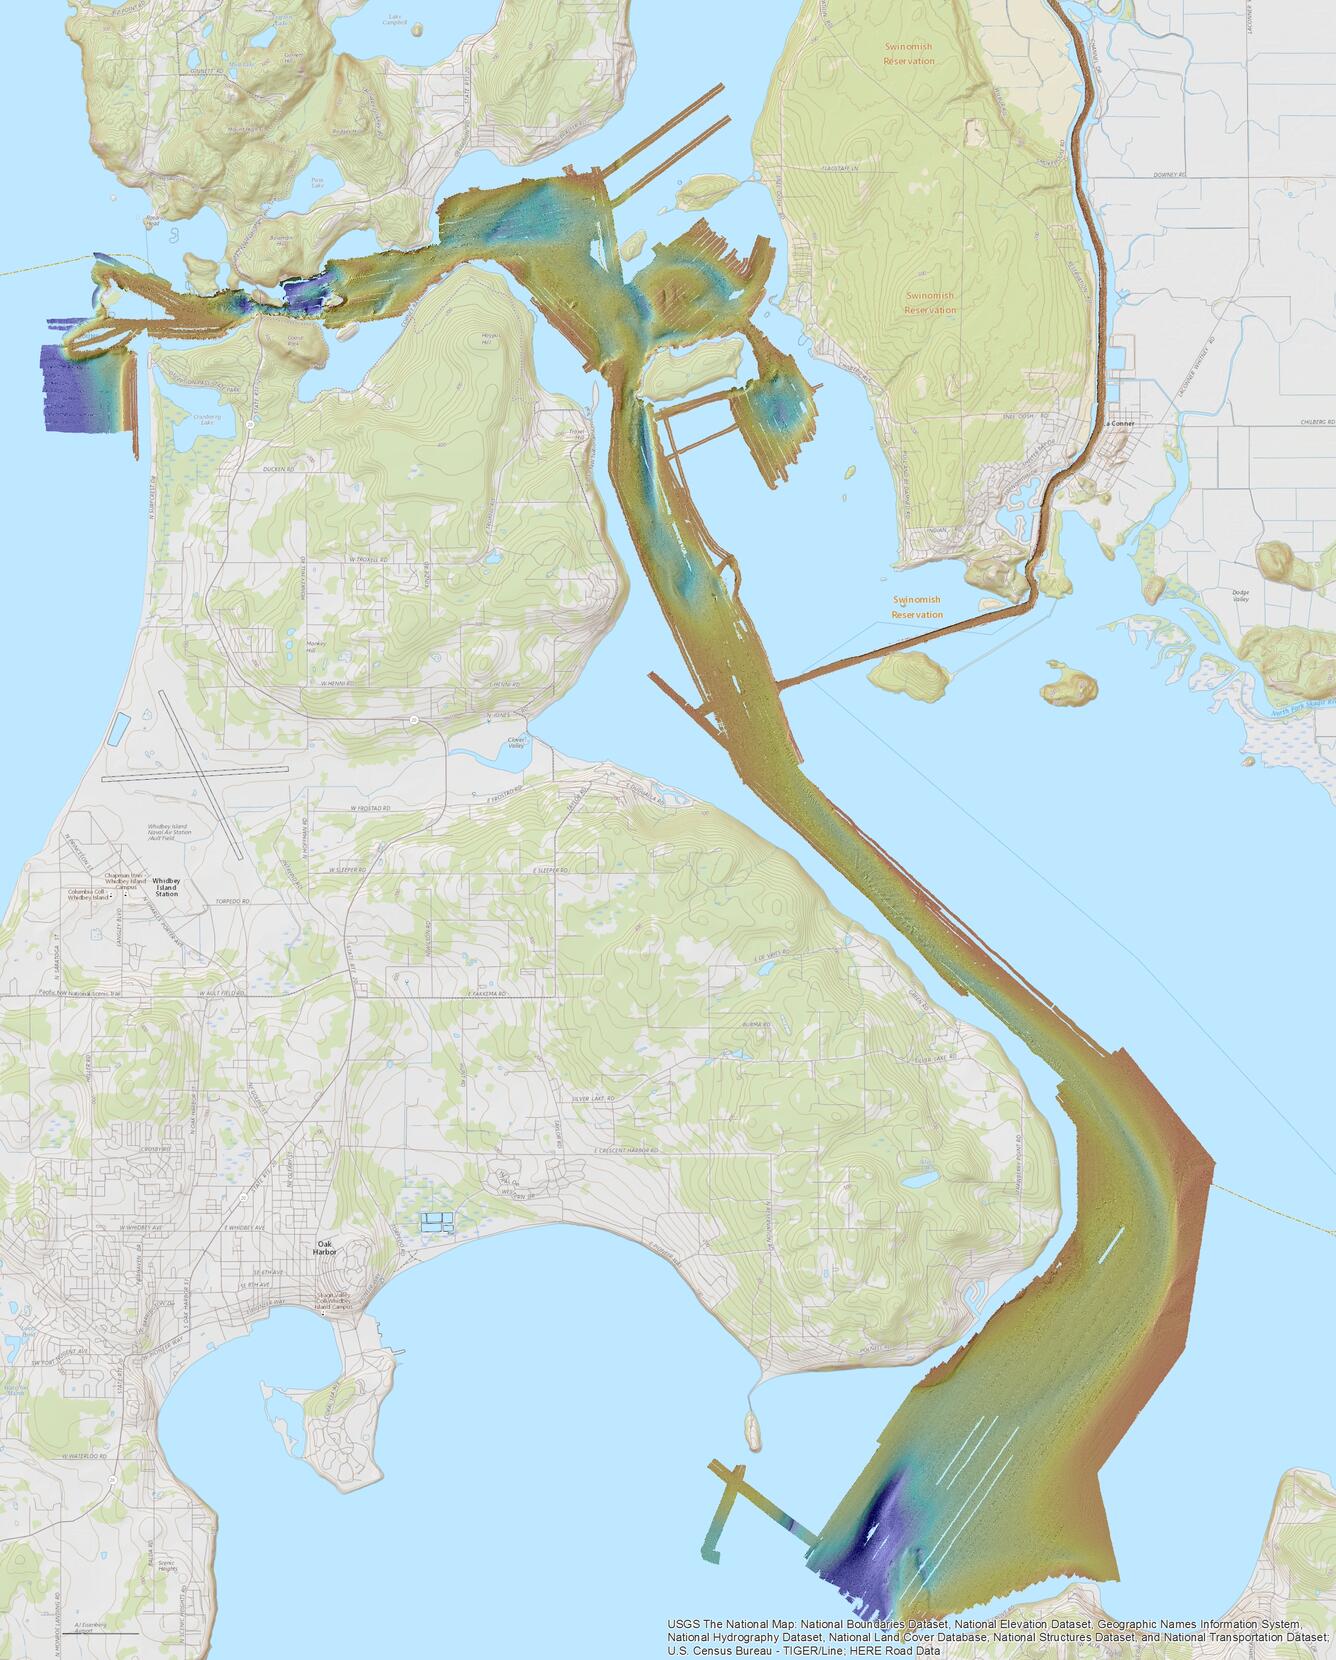 Illustrative map of an ocean bay that shows depth of the water in places where depth data has been collected.